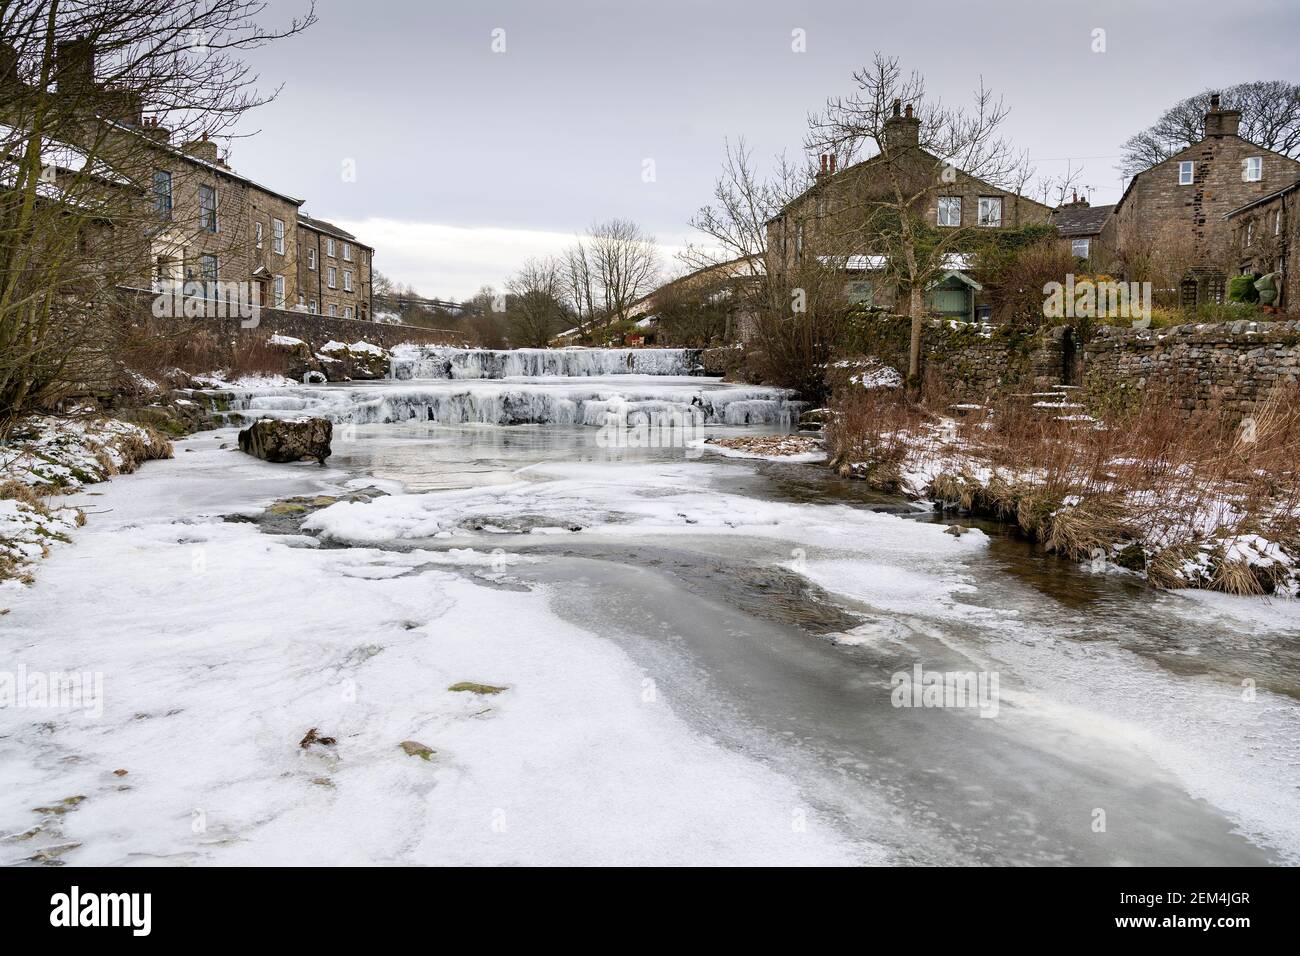 Froze waterfall on Gayle Beck, Hawes, Yorkshire Dales National Park, UK. Stock Photo